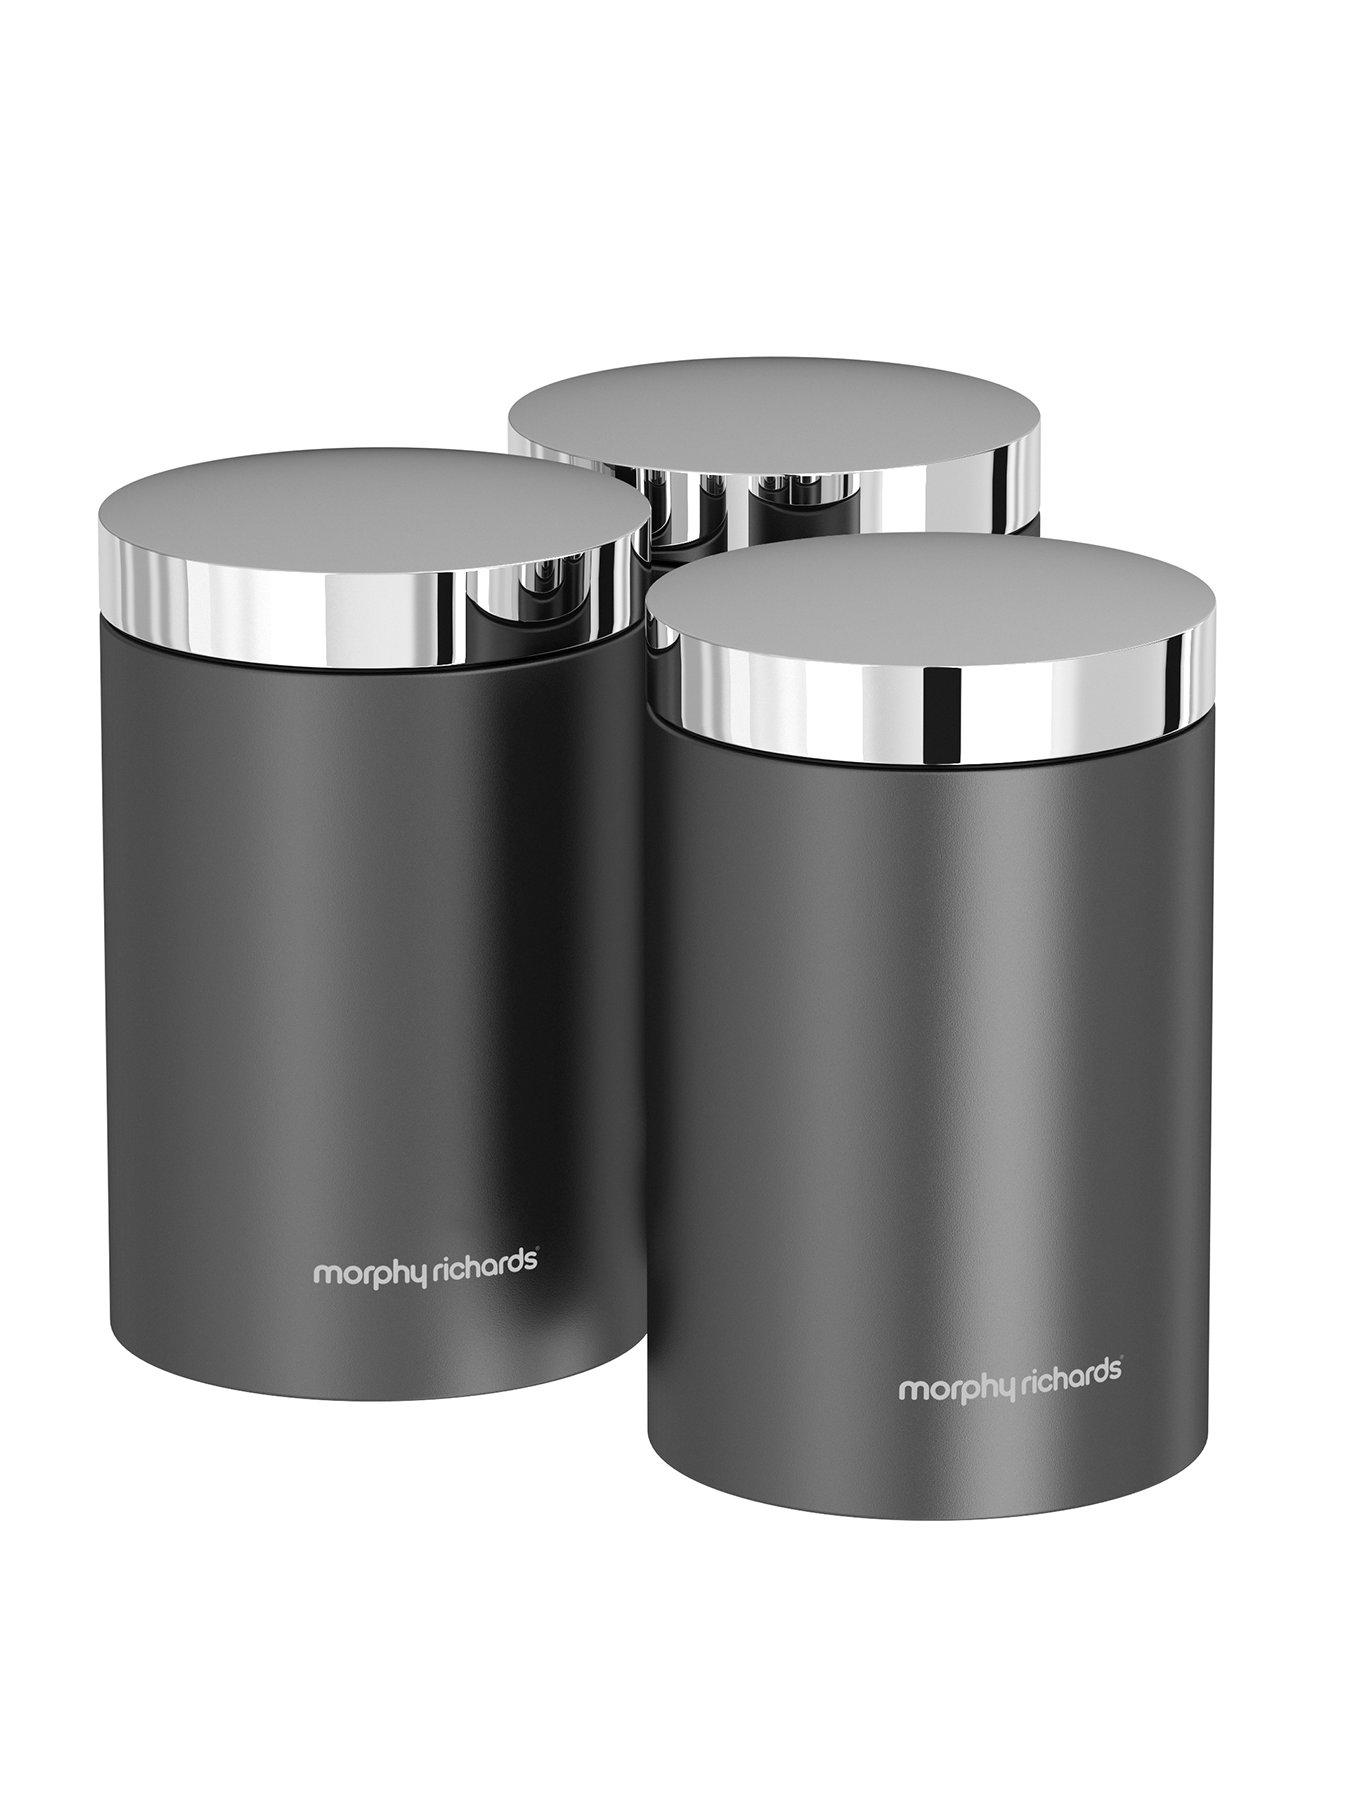 Morphy Richards 974065 Accents Kitchen Storage Canisters Translucent Black Stainless Steel Set of 3 